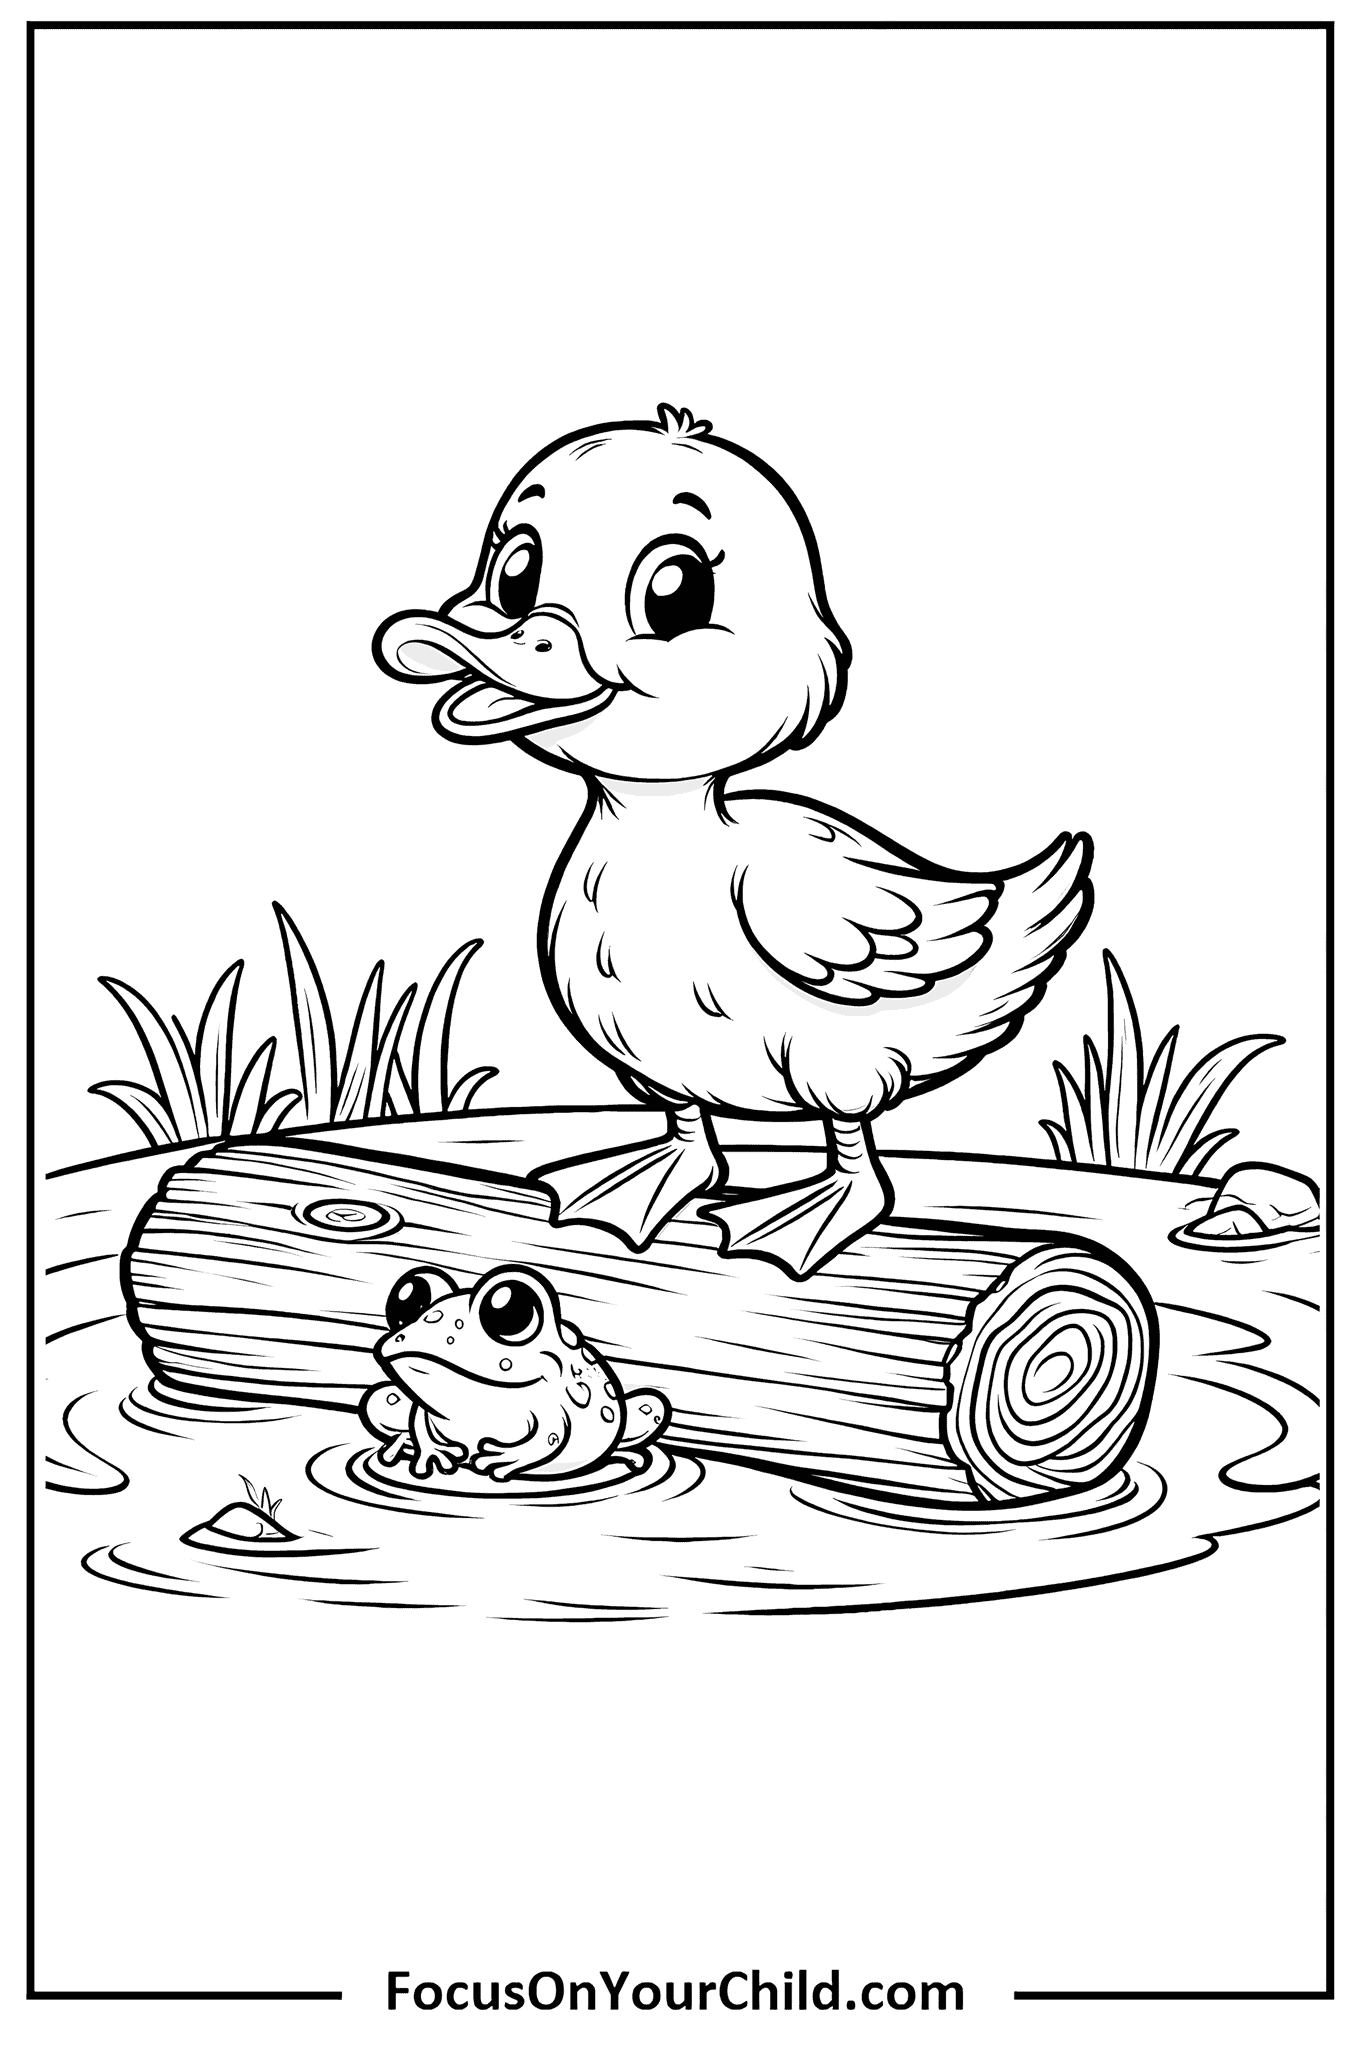 Charming duckling and frog illustration for coloring, perfect for kids creative activities.